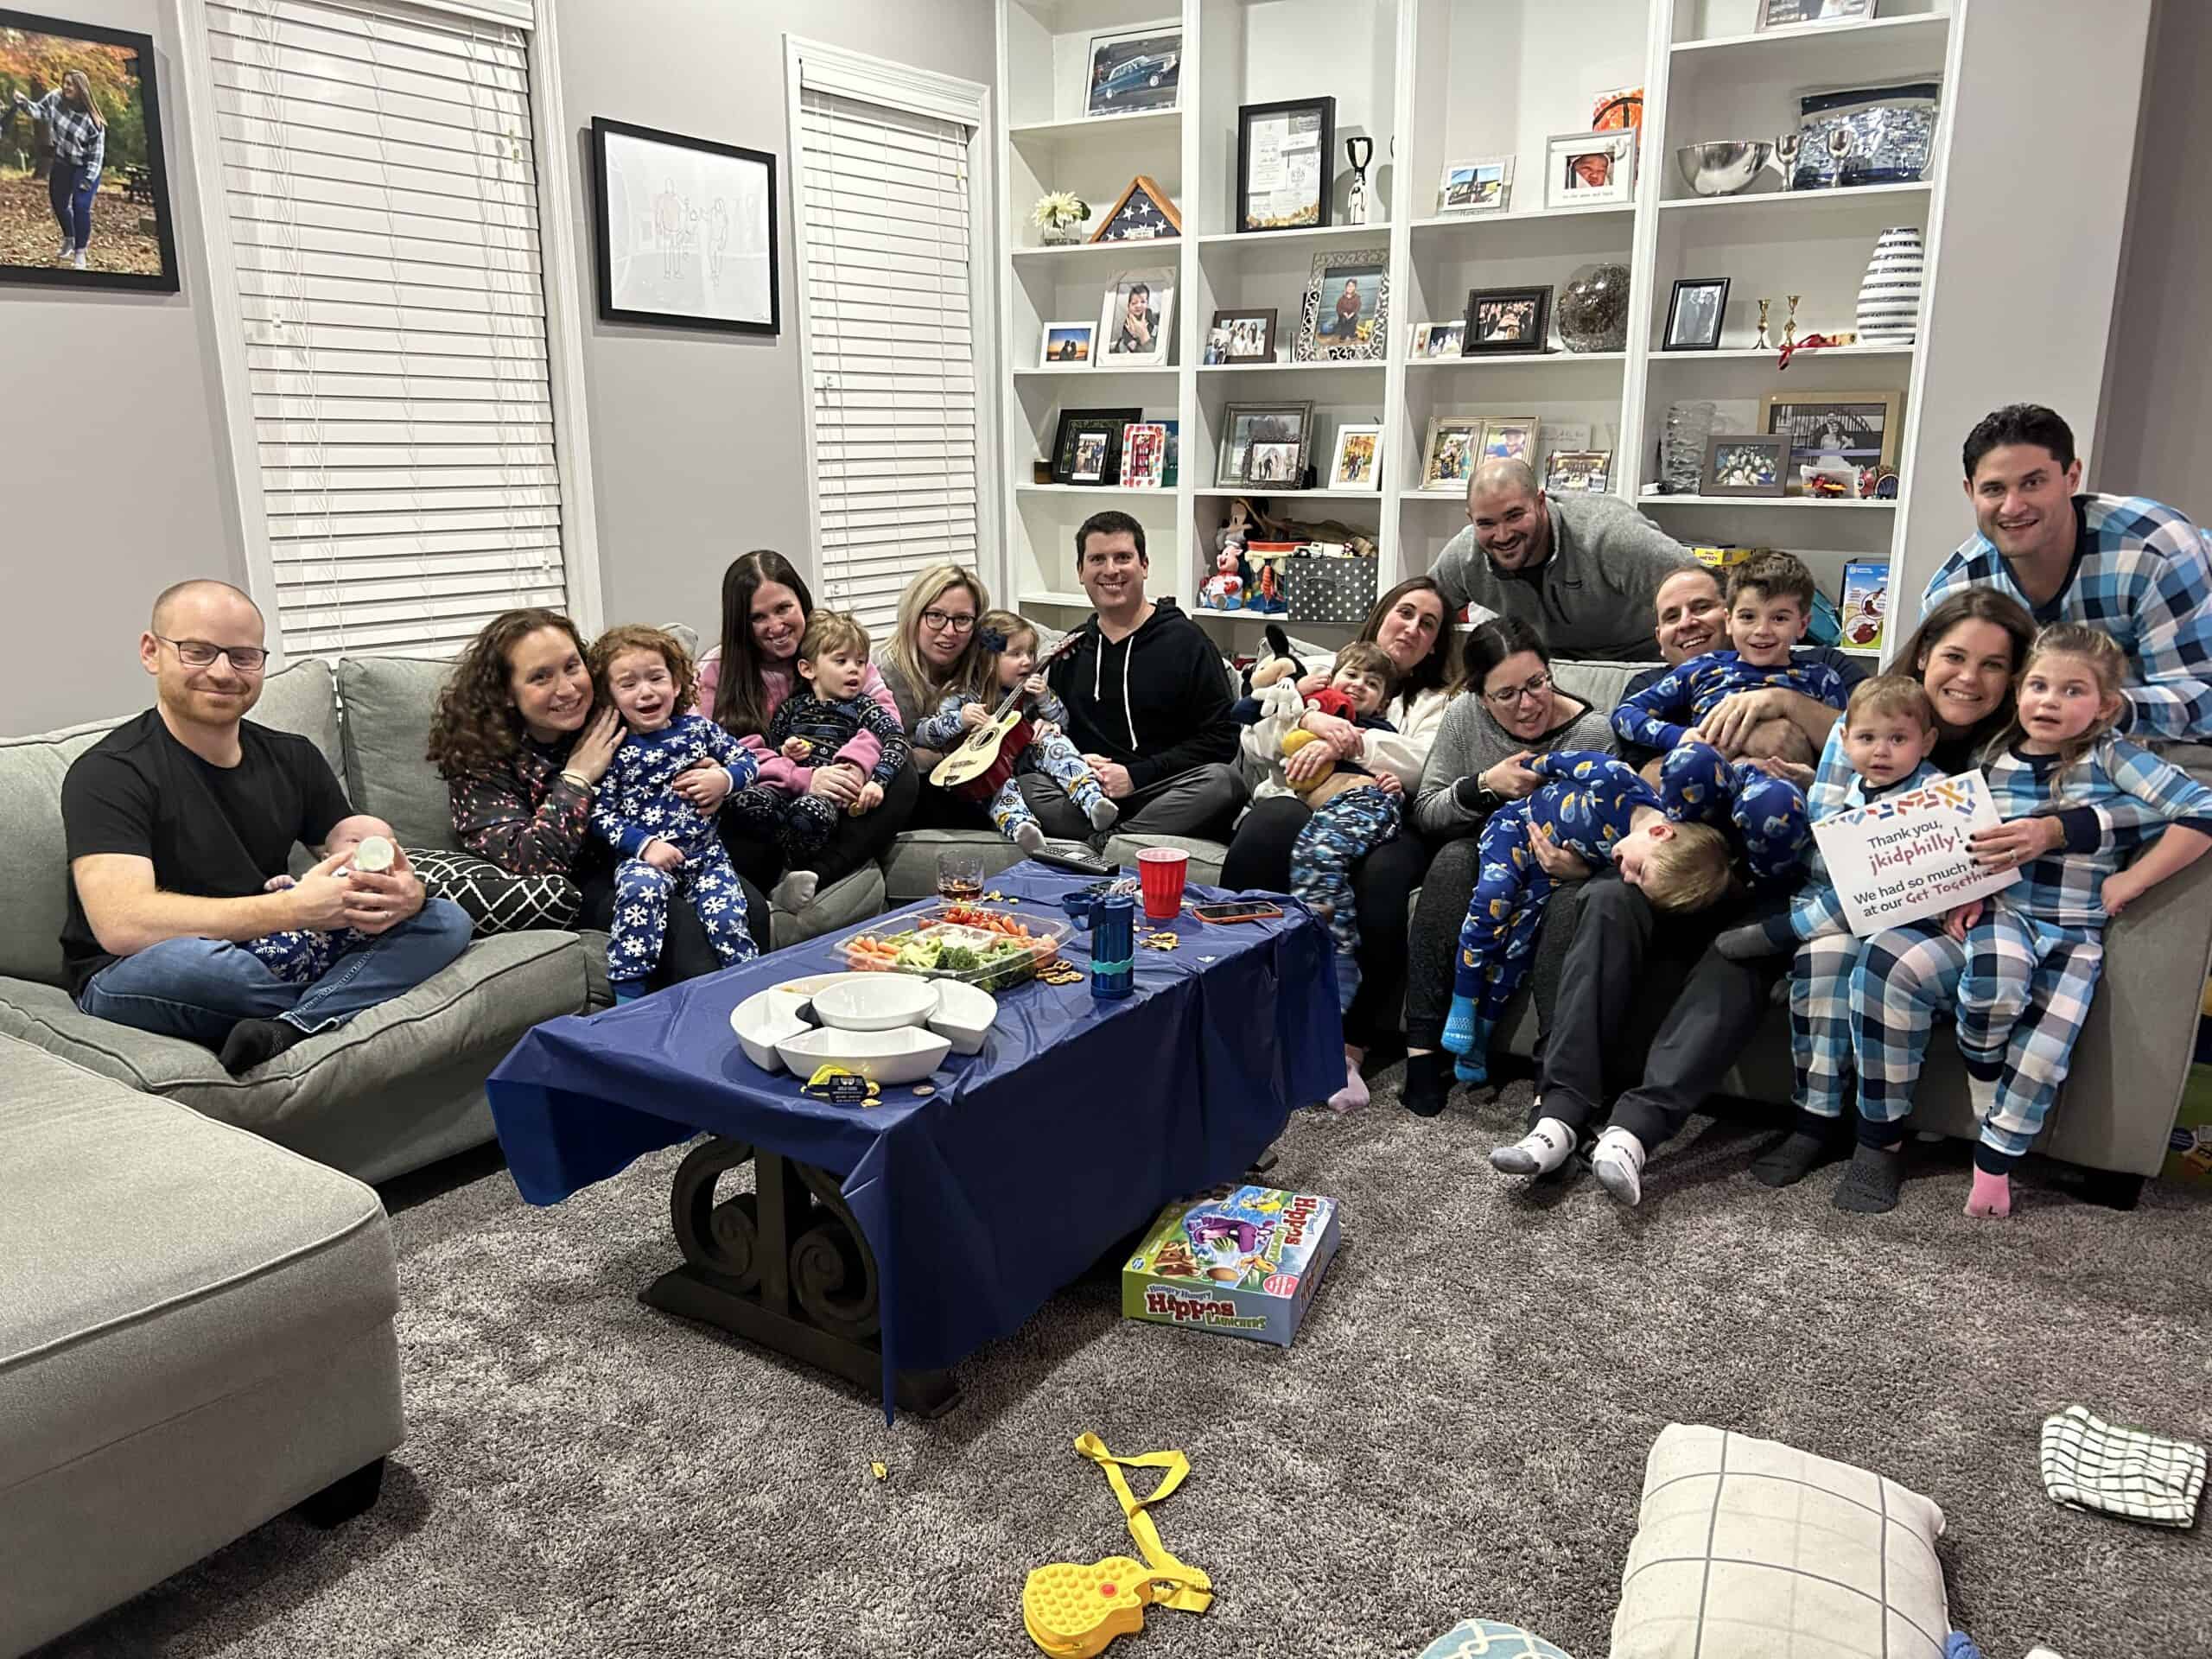 A photo of a large amount of adults, several with children on their laps, sitting on a very long sofa.